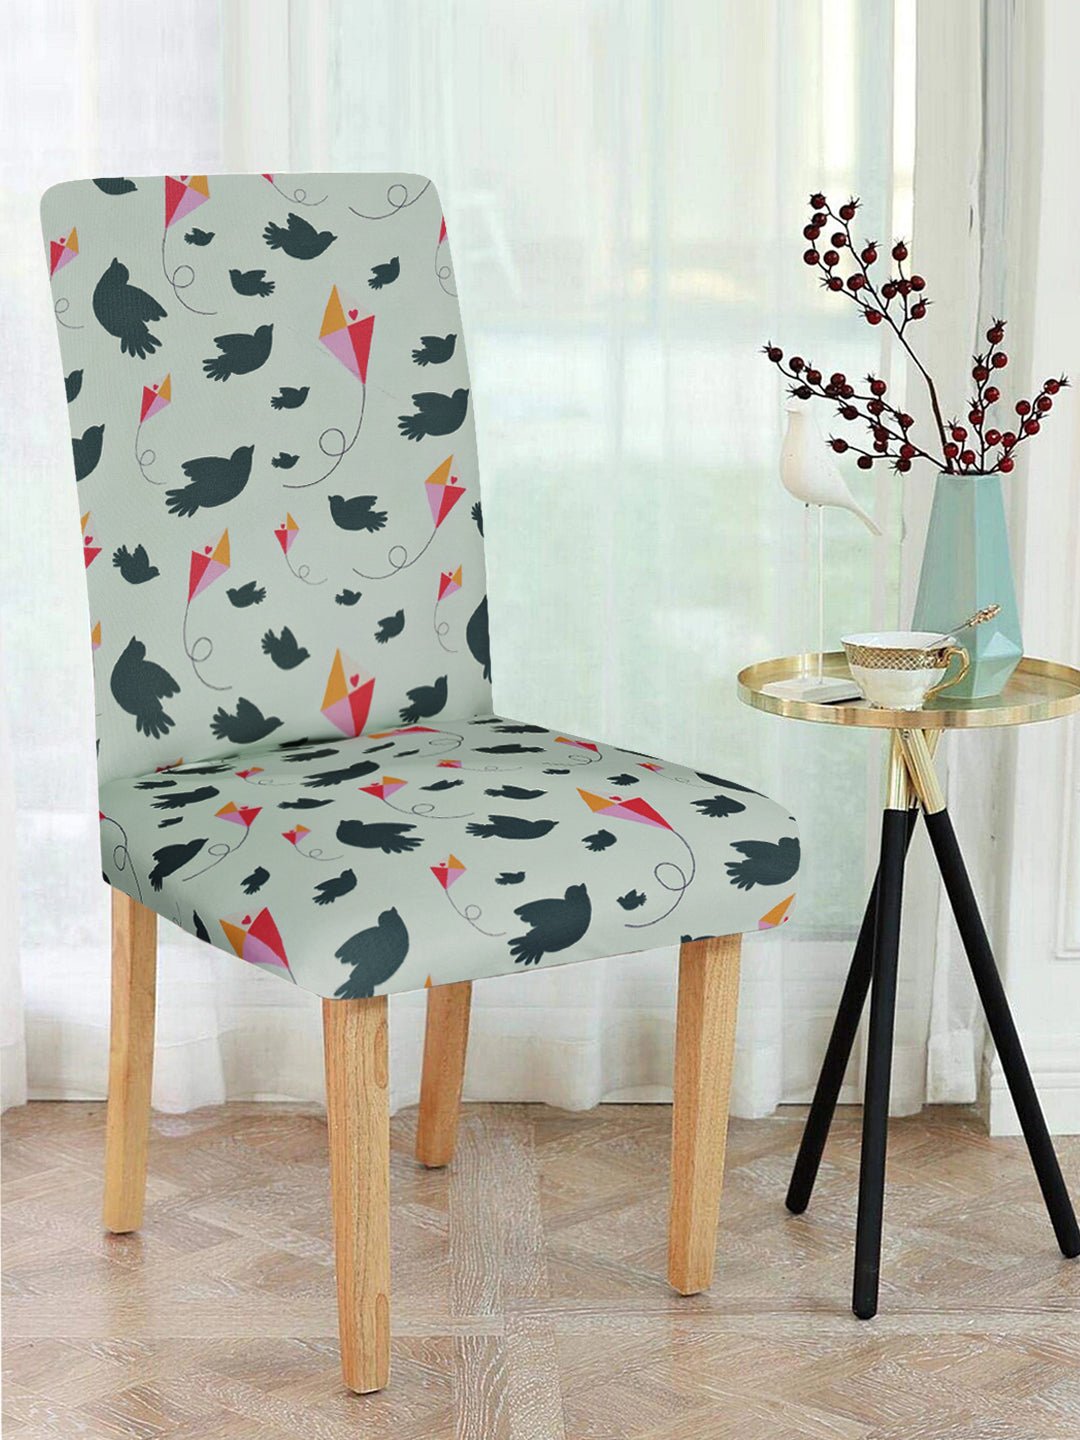 Magic Universal Chair Cover - Birds & Kites Printed - DivineTrendz, Small bedroom chair covers, bedroom chair slip covers, chairs covers near me, chairs covers set of 6, chair slipcovers for dining table, chair covers set of 6 in india,chair covers online,